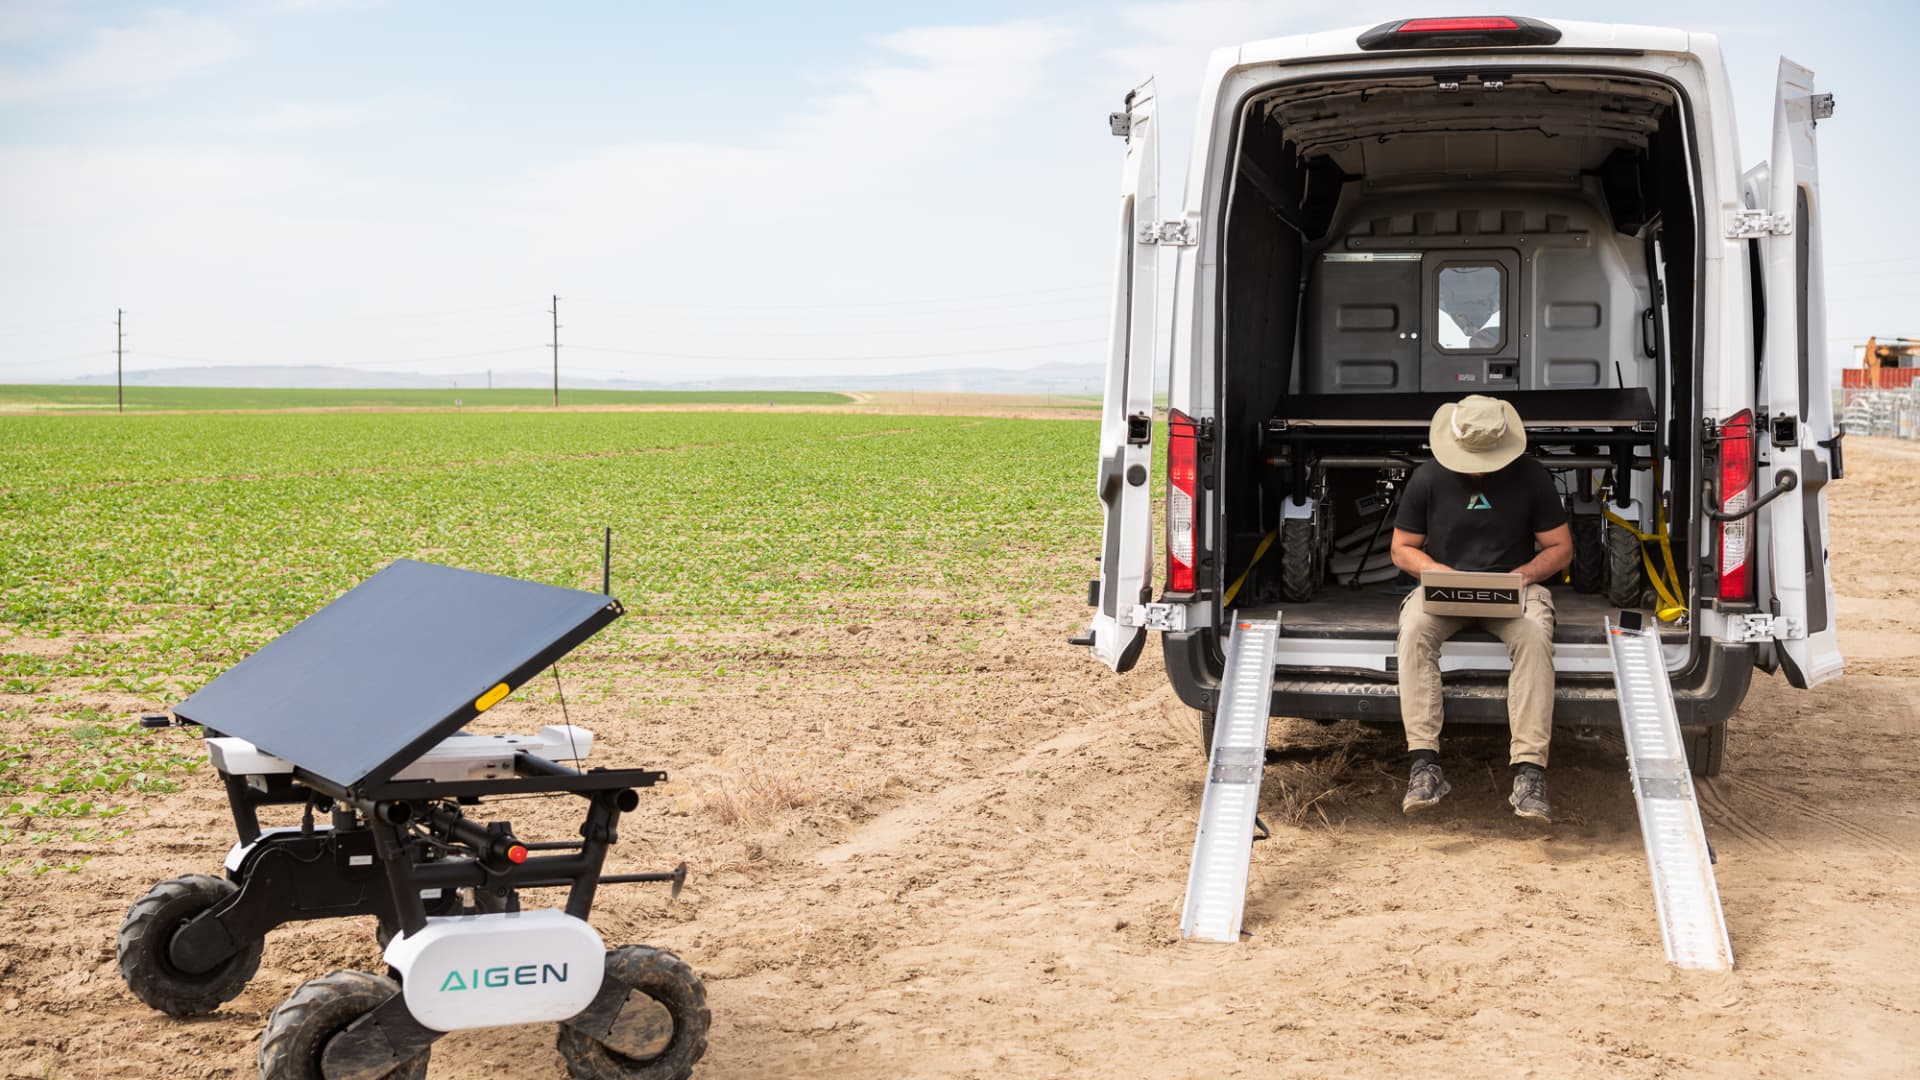 The Aigen Element uses computer vision to spot and eliminate weeds without pesticides.